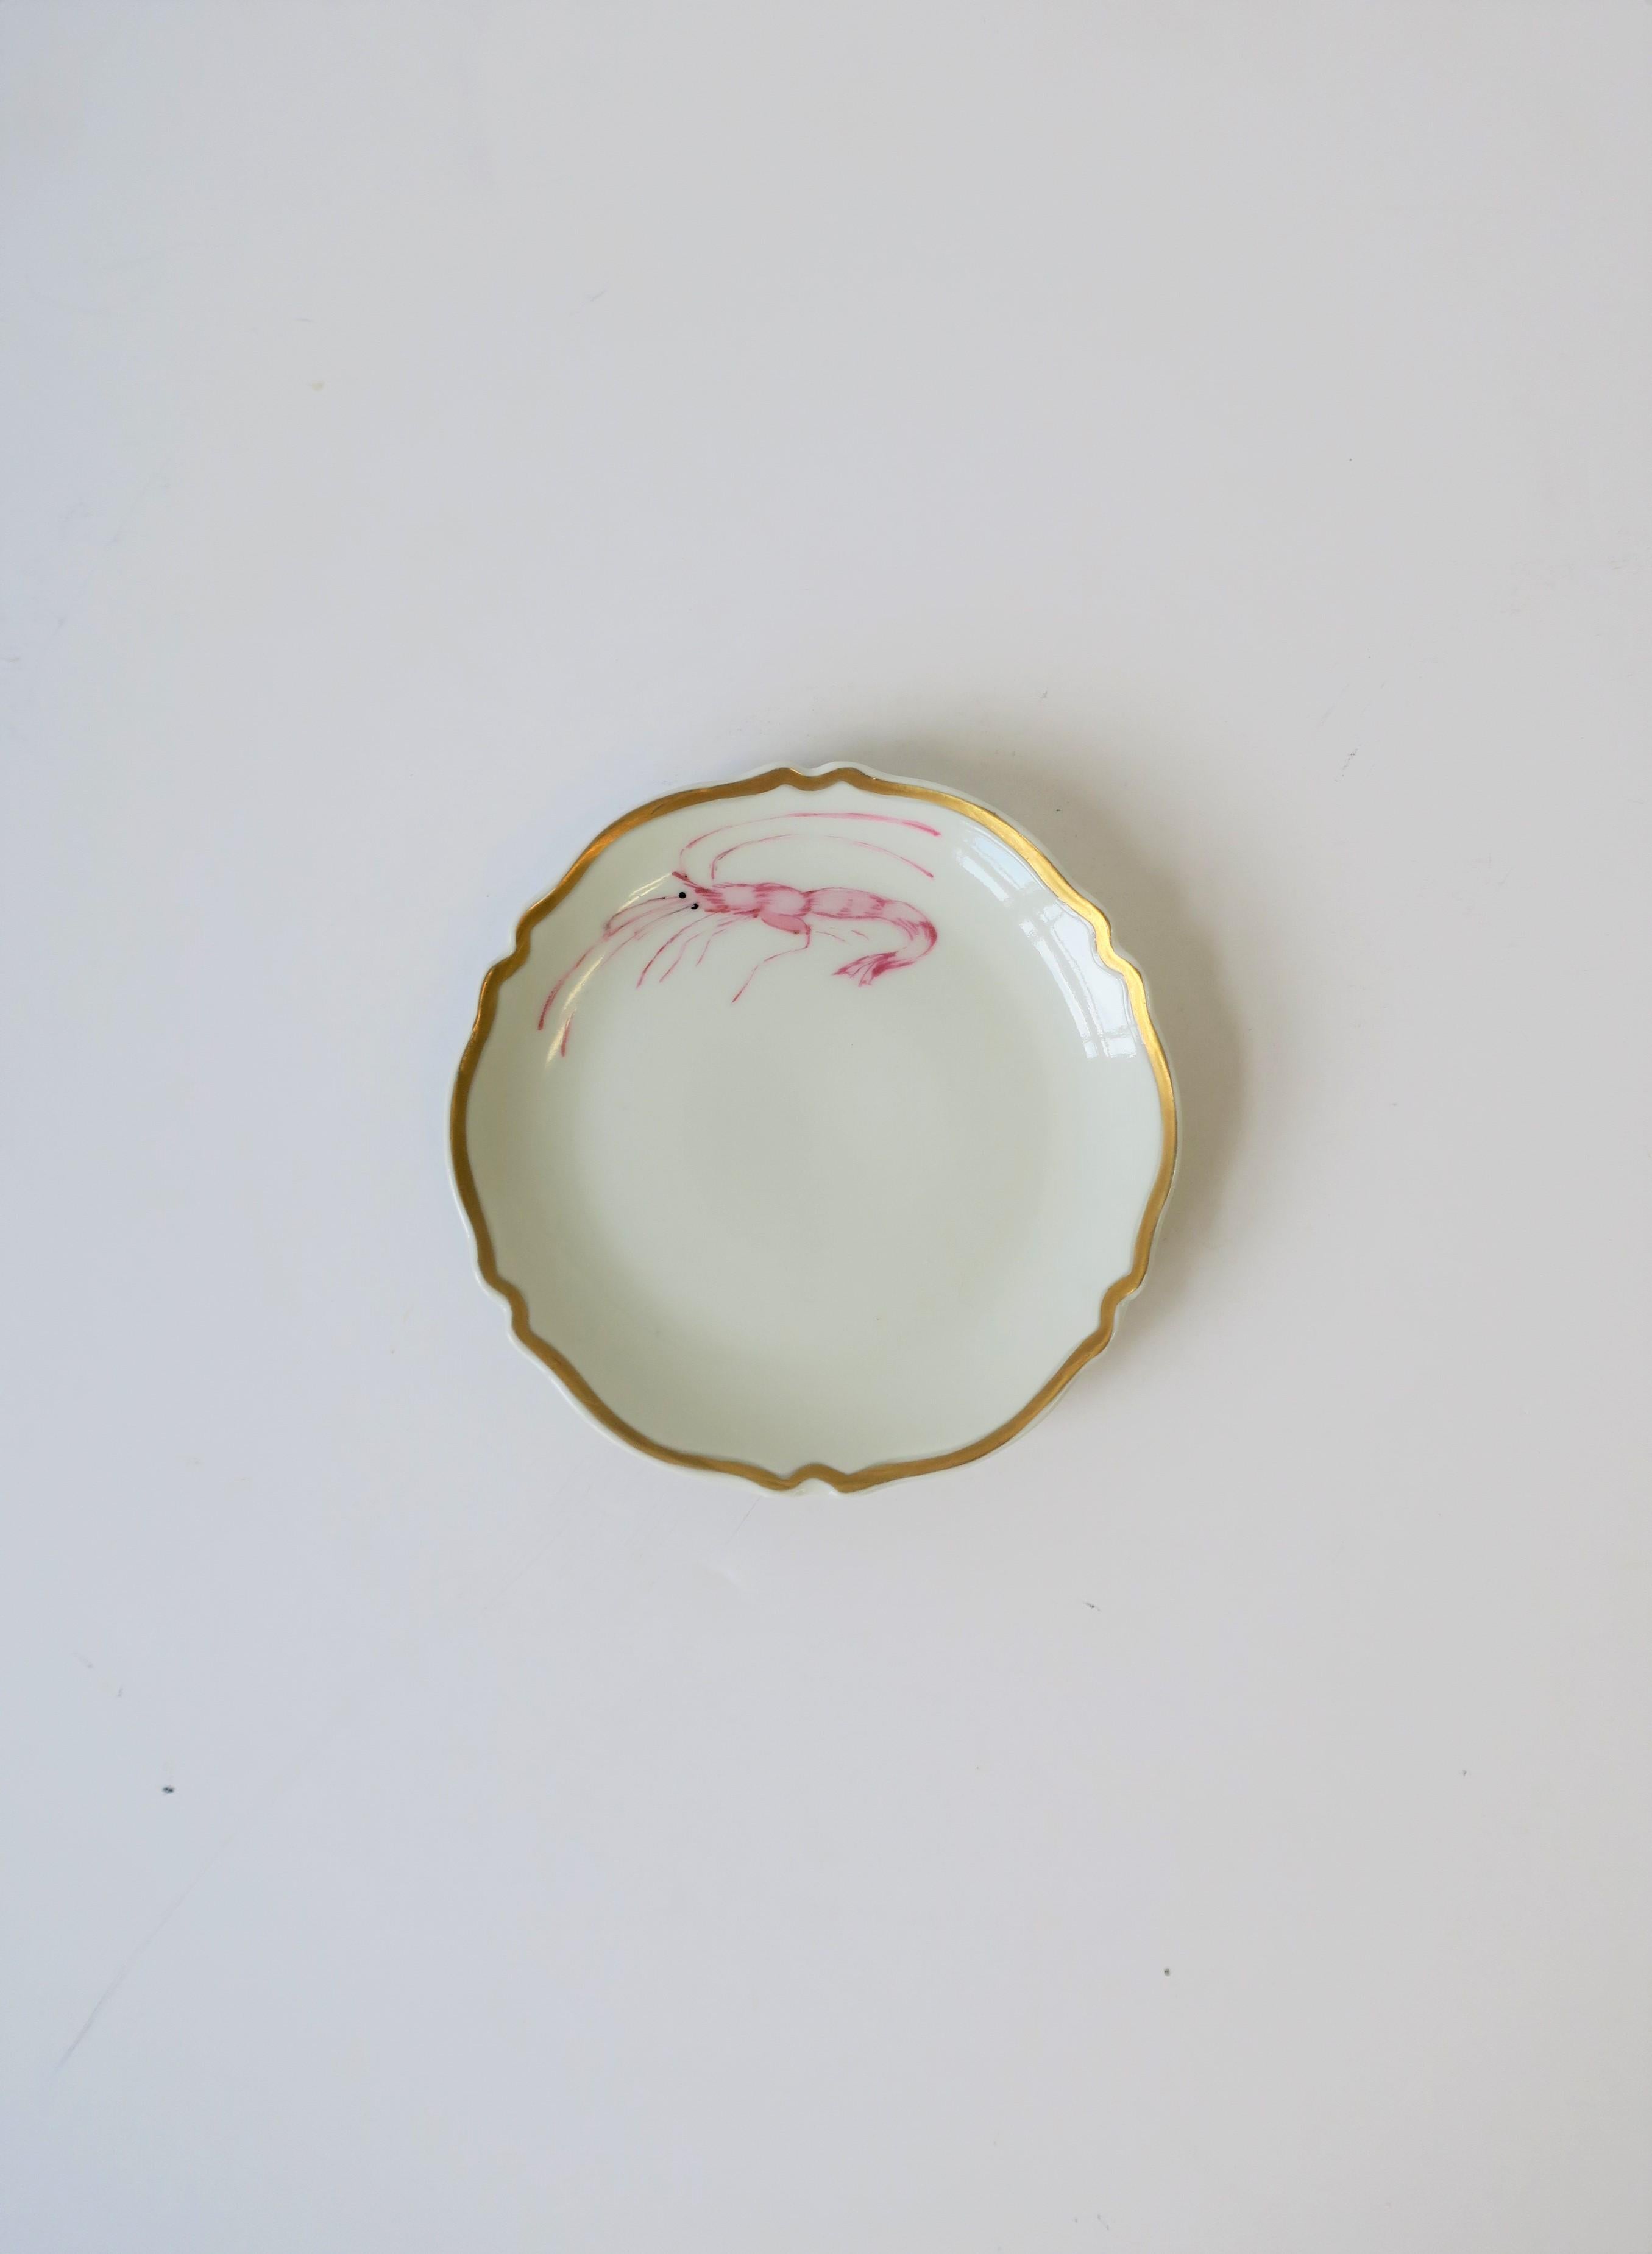 A beautiful midcentury French white and gold round porcelain jewelry dish by Limoges, circa mid-20th century, France. Dish has gold detail around decorative edge and a decorative 'lobster' or 'shrimp' sea creature or crustacean. All hand-painted.